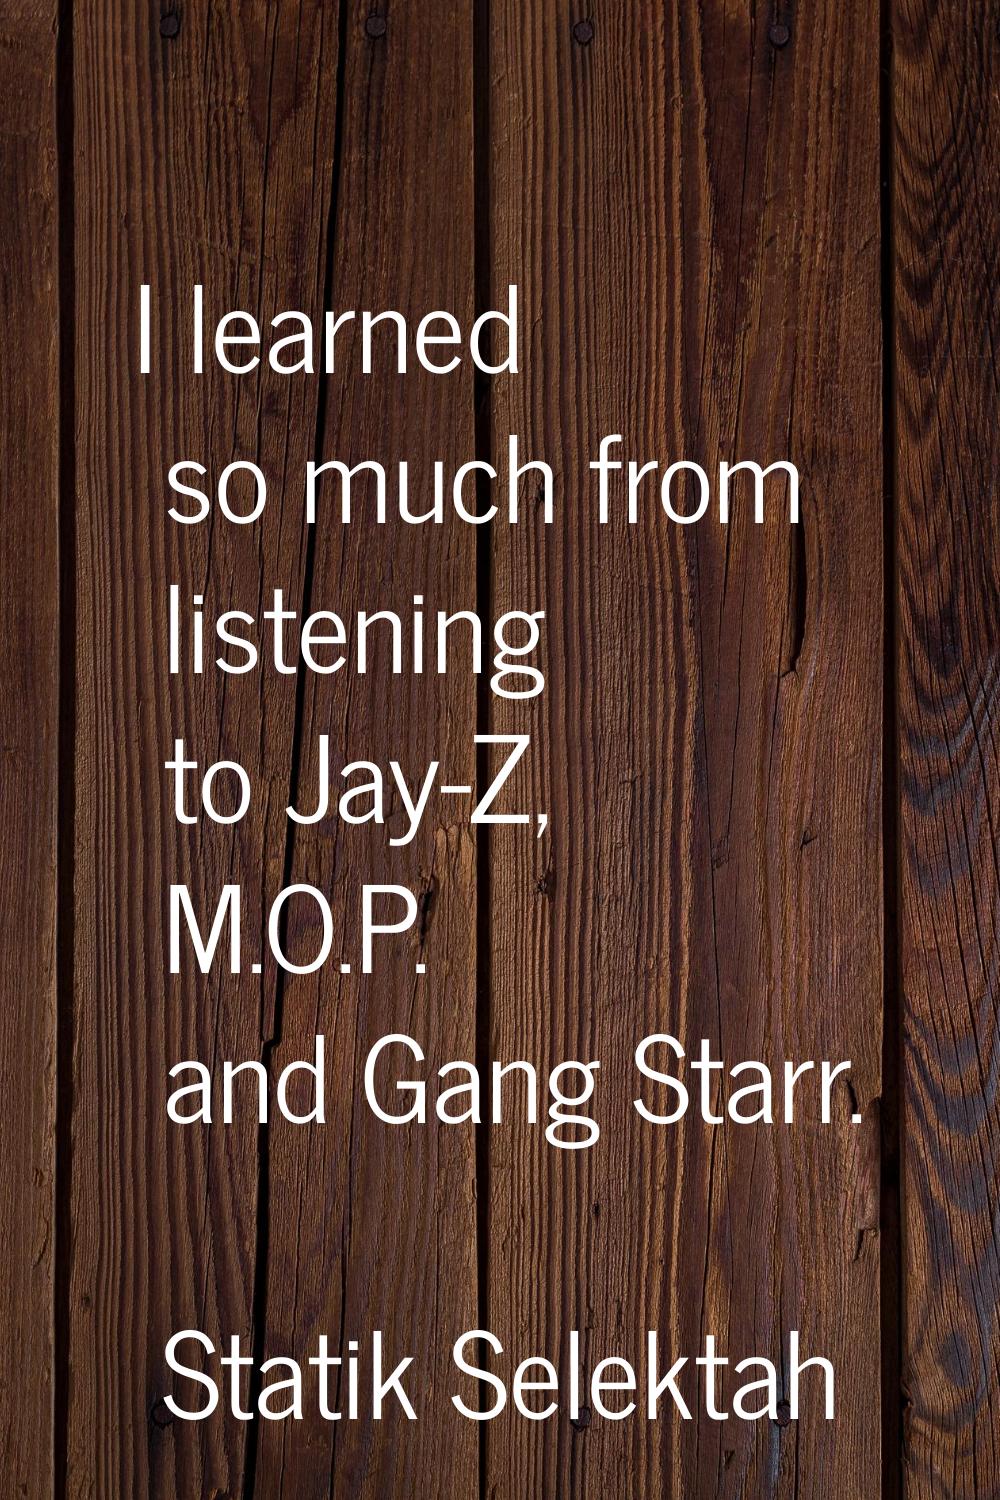 I learned so much from listening to Jay-Z, M.O.P. and Gang Starr.